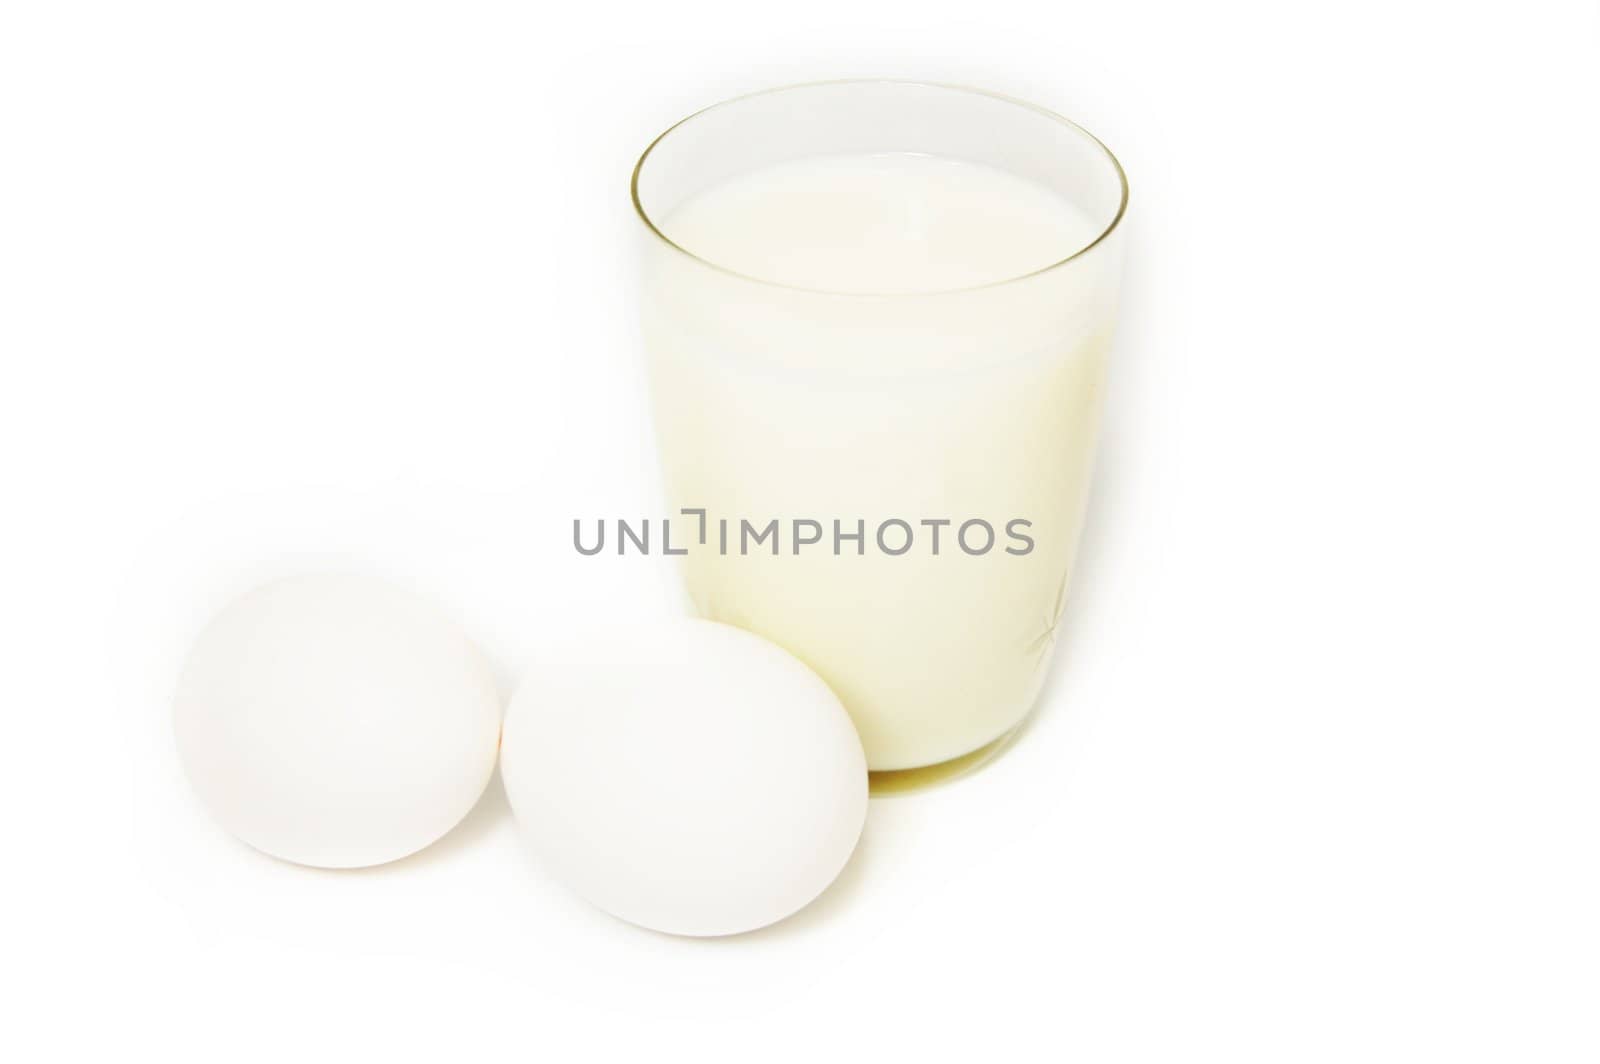 Glass of milk and eggs on white